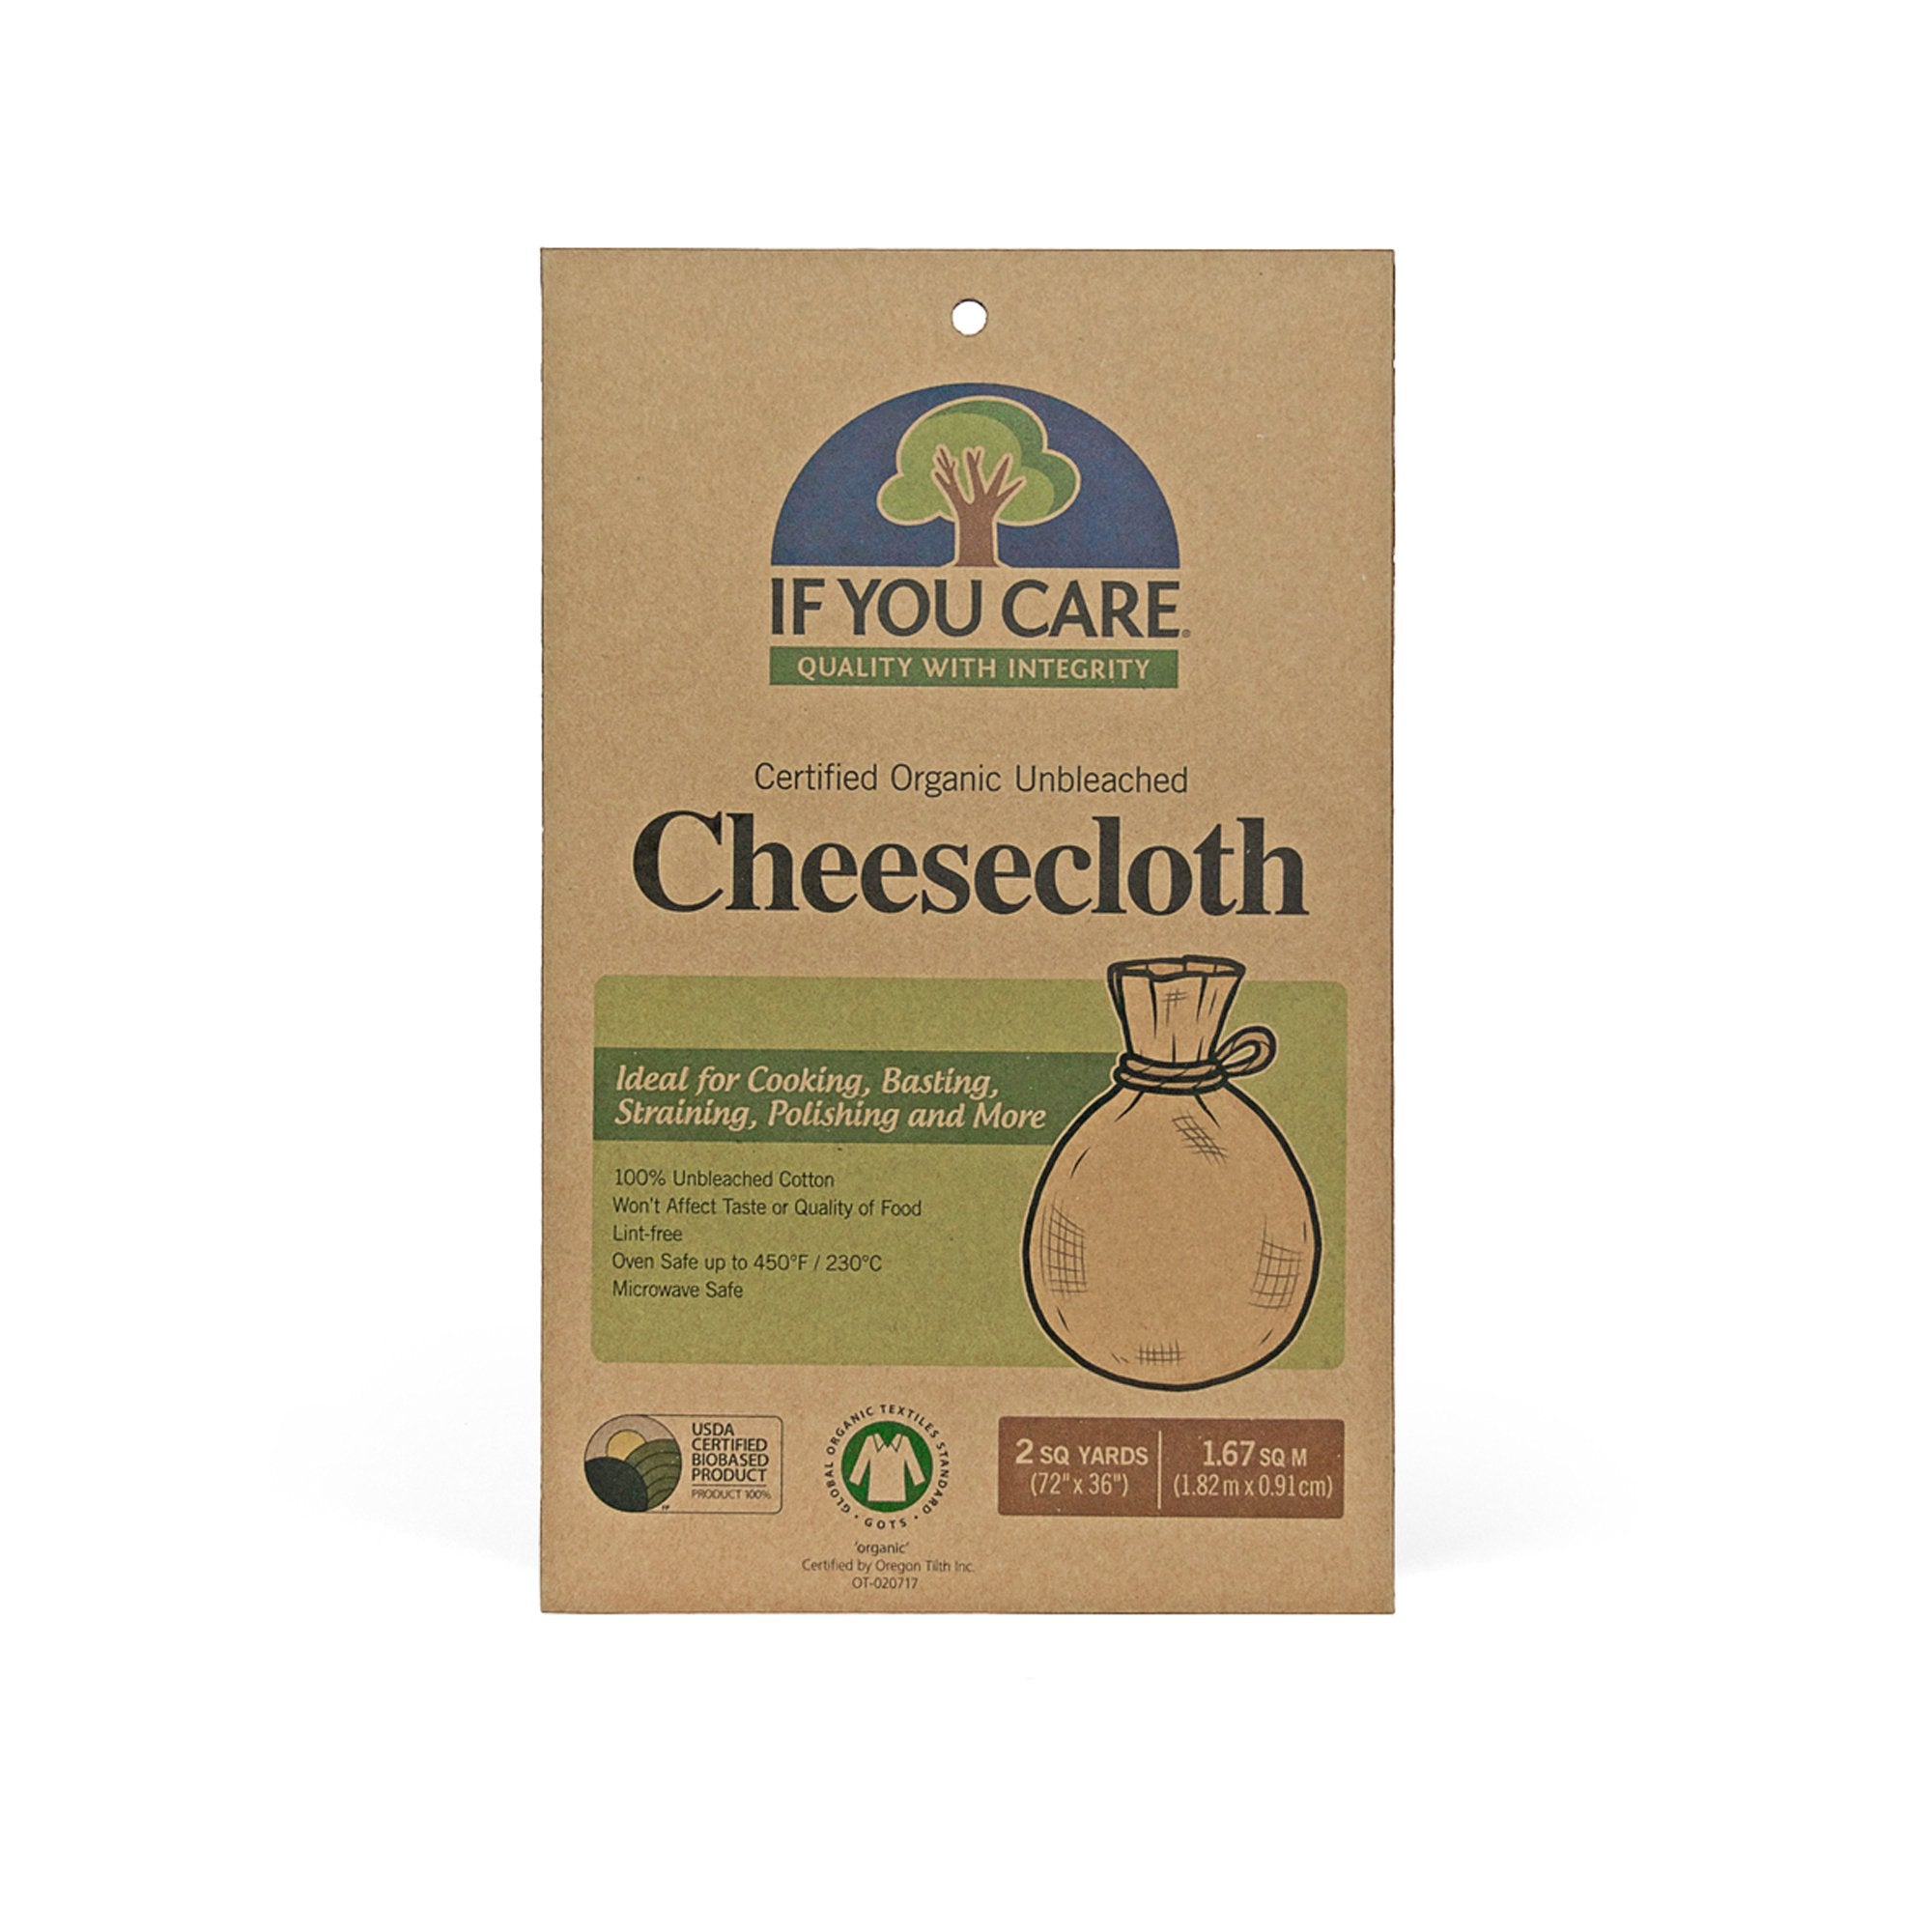 Cheesecloth - Unbleached Natural Cotton Cloth - Best Grade 60 for Cooking  Food, Making Cheese, Straining Nut Milks, Basting Turkey - 5 Sq Yards from